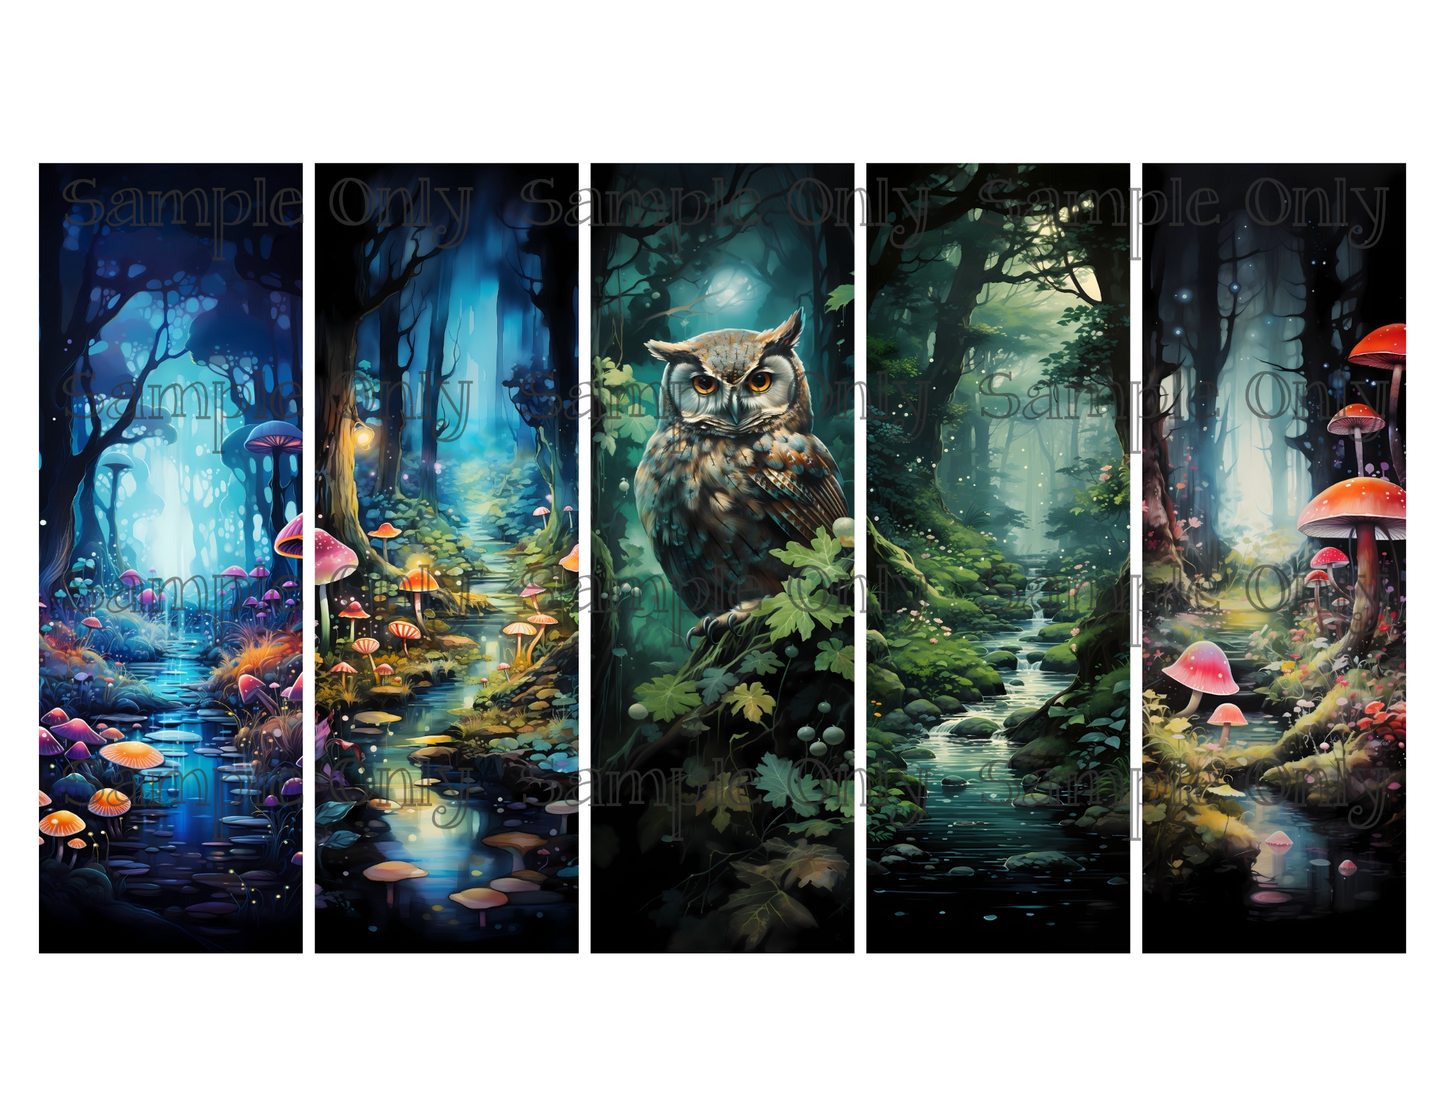 Magical Fantasy Forest Bookmark Set 01 Printed Water Soluble Image Transfer Sheet For Polymer Clay